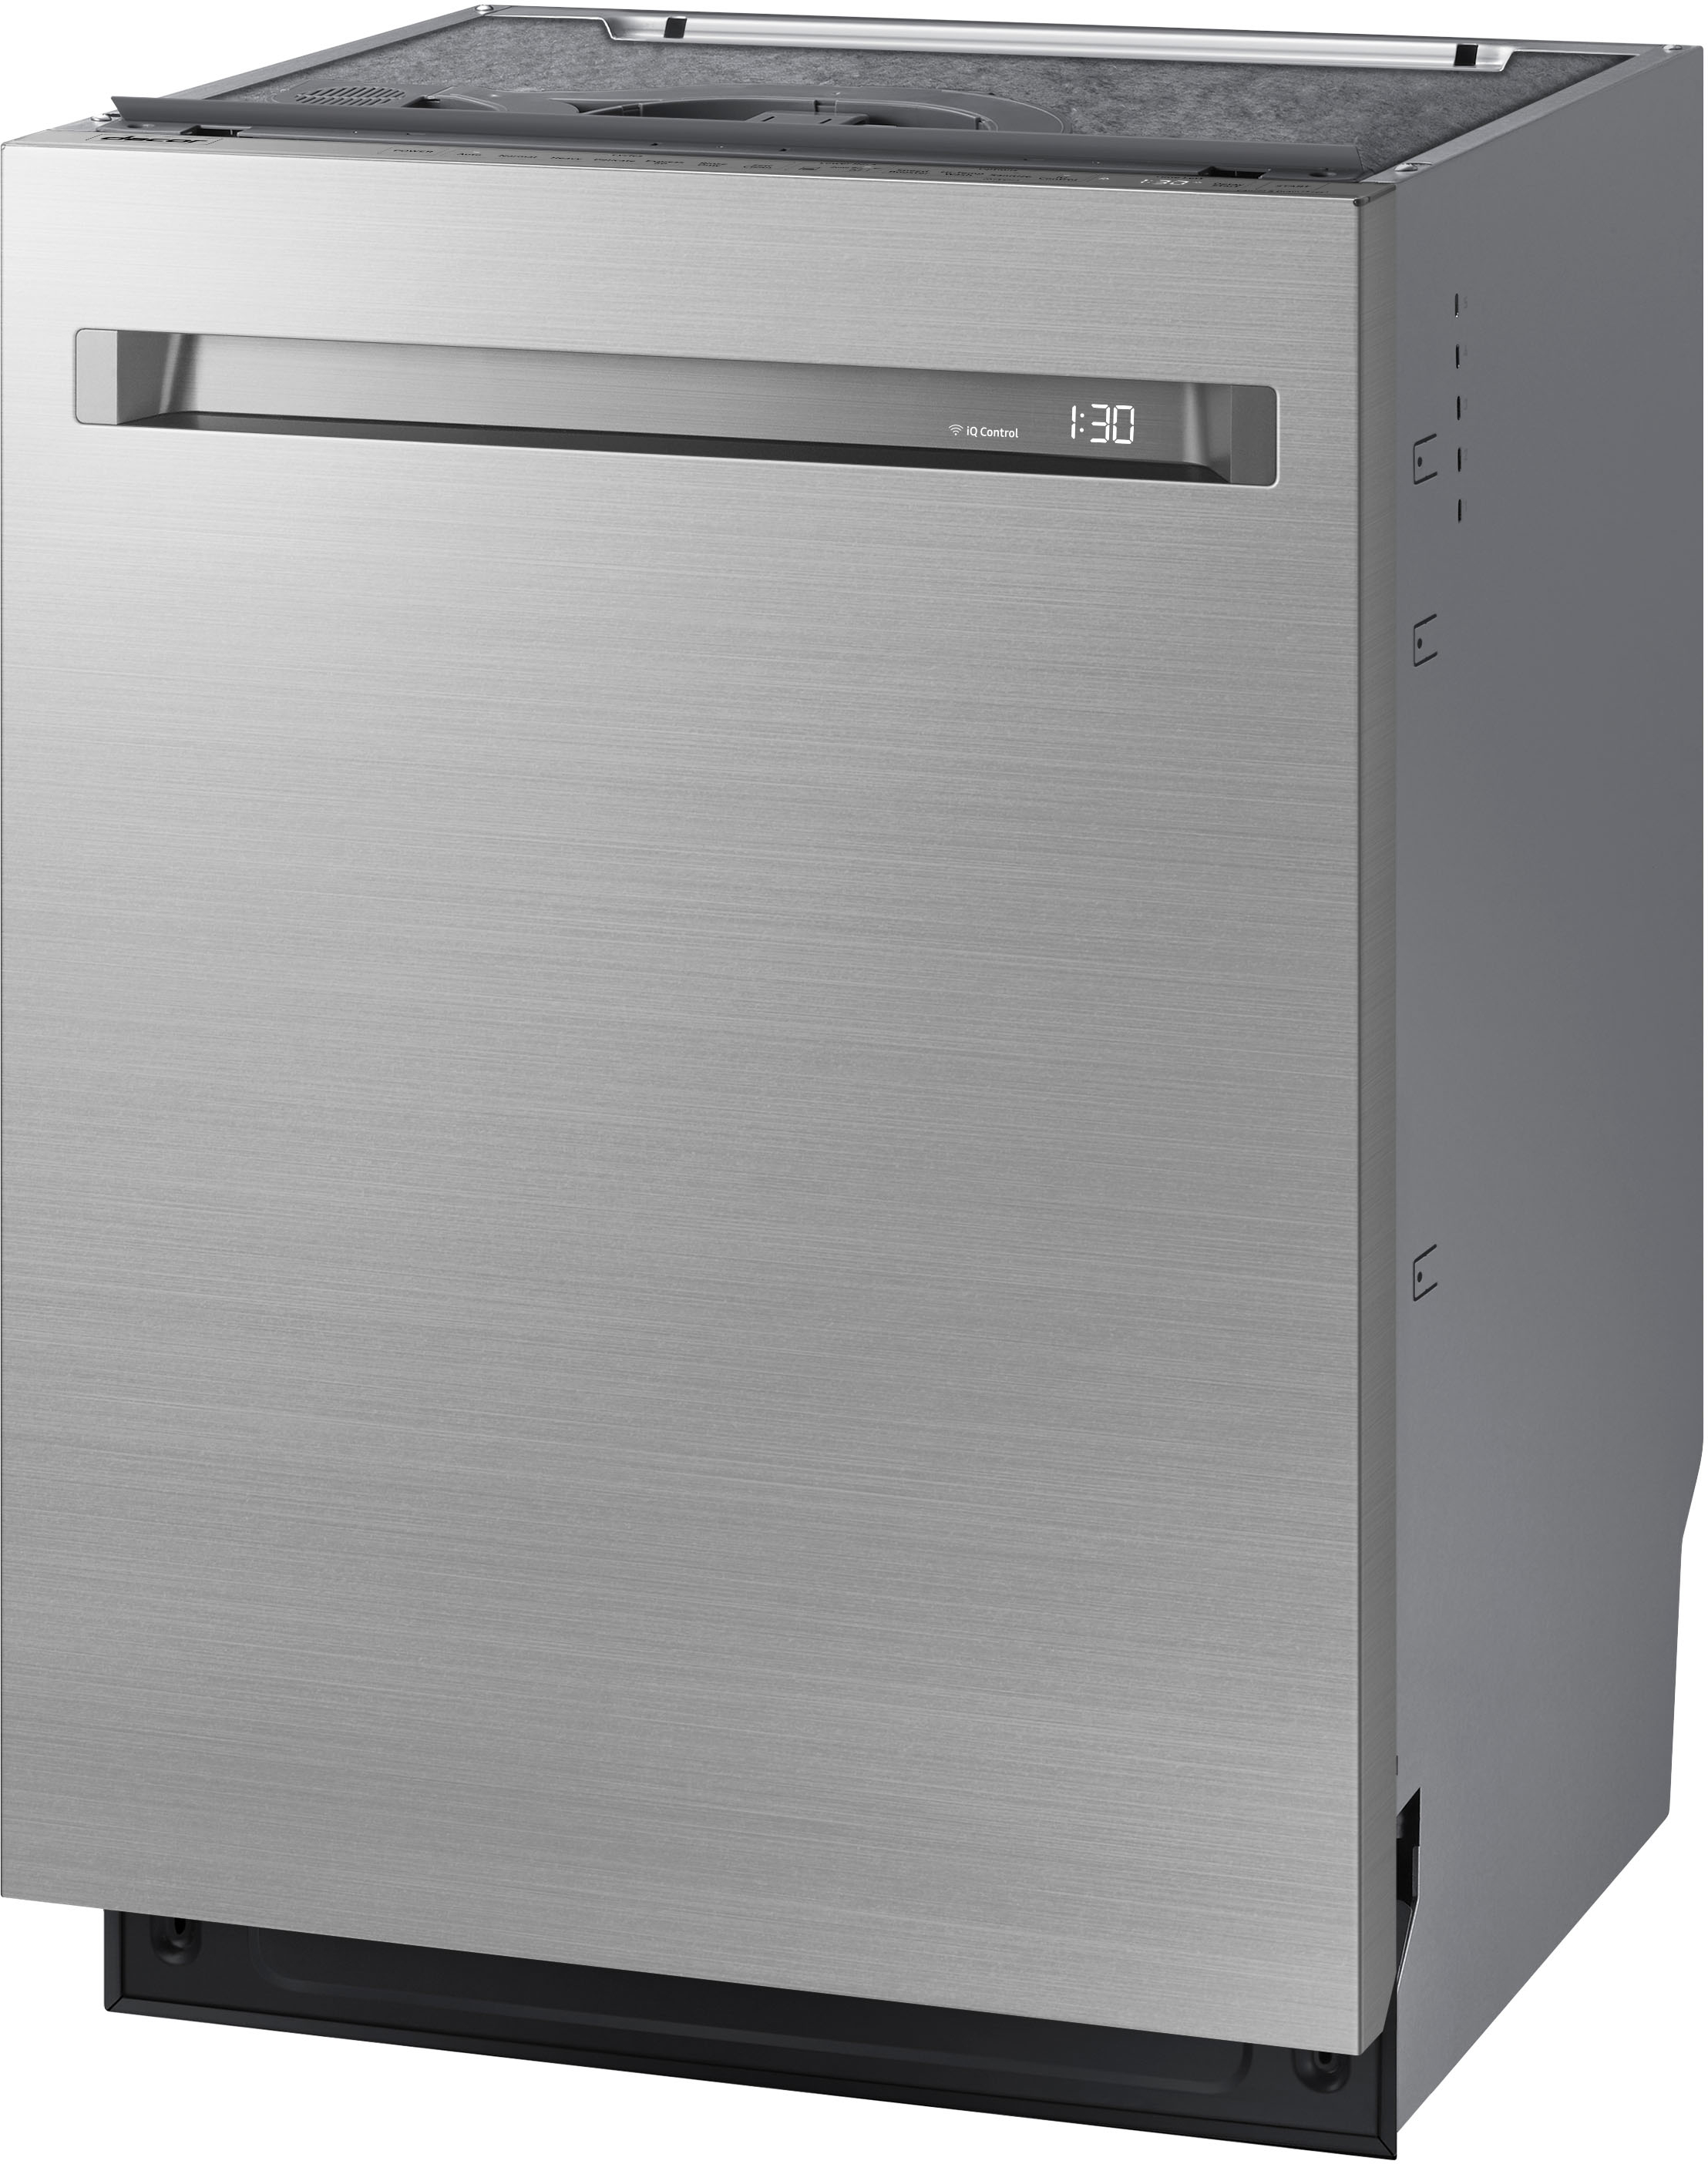 Angle View: JennAir - Euro-Style TriFecta 24" Top Control Built-In Dishwasher with Stainless Steel Tub - Stainless steel